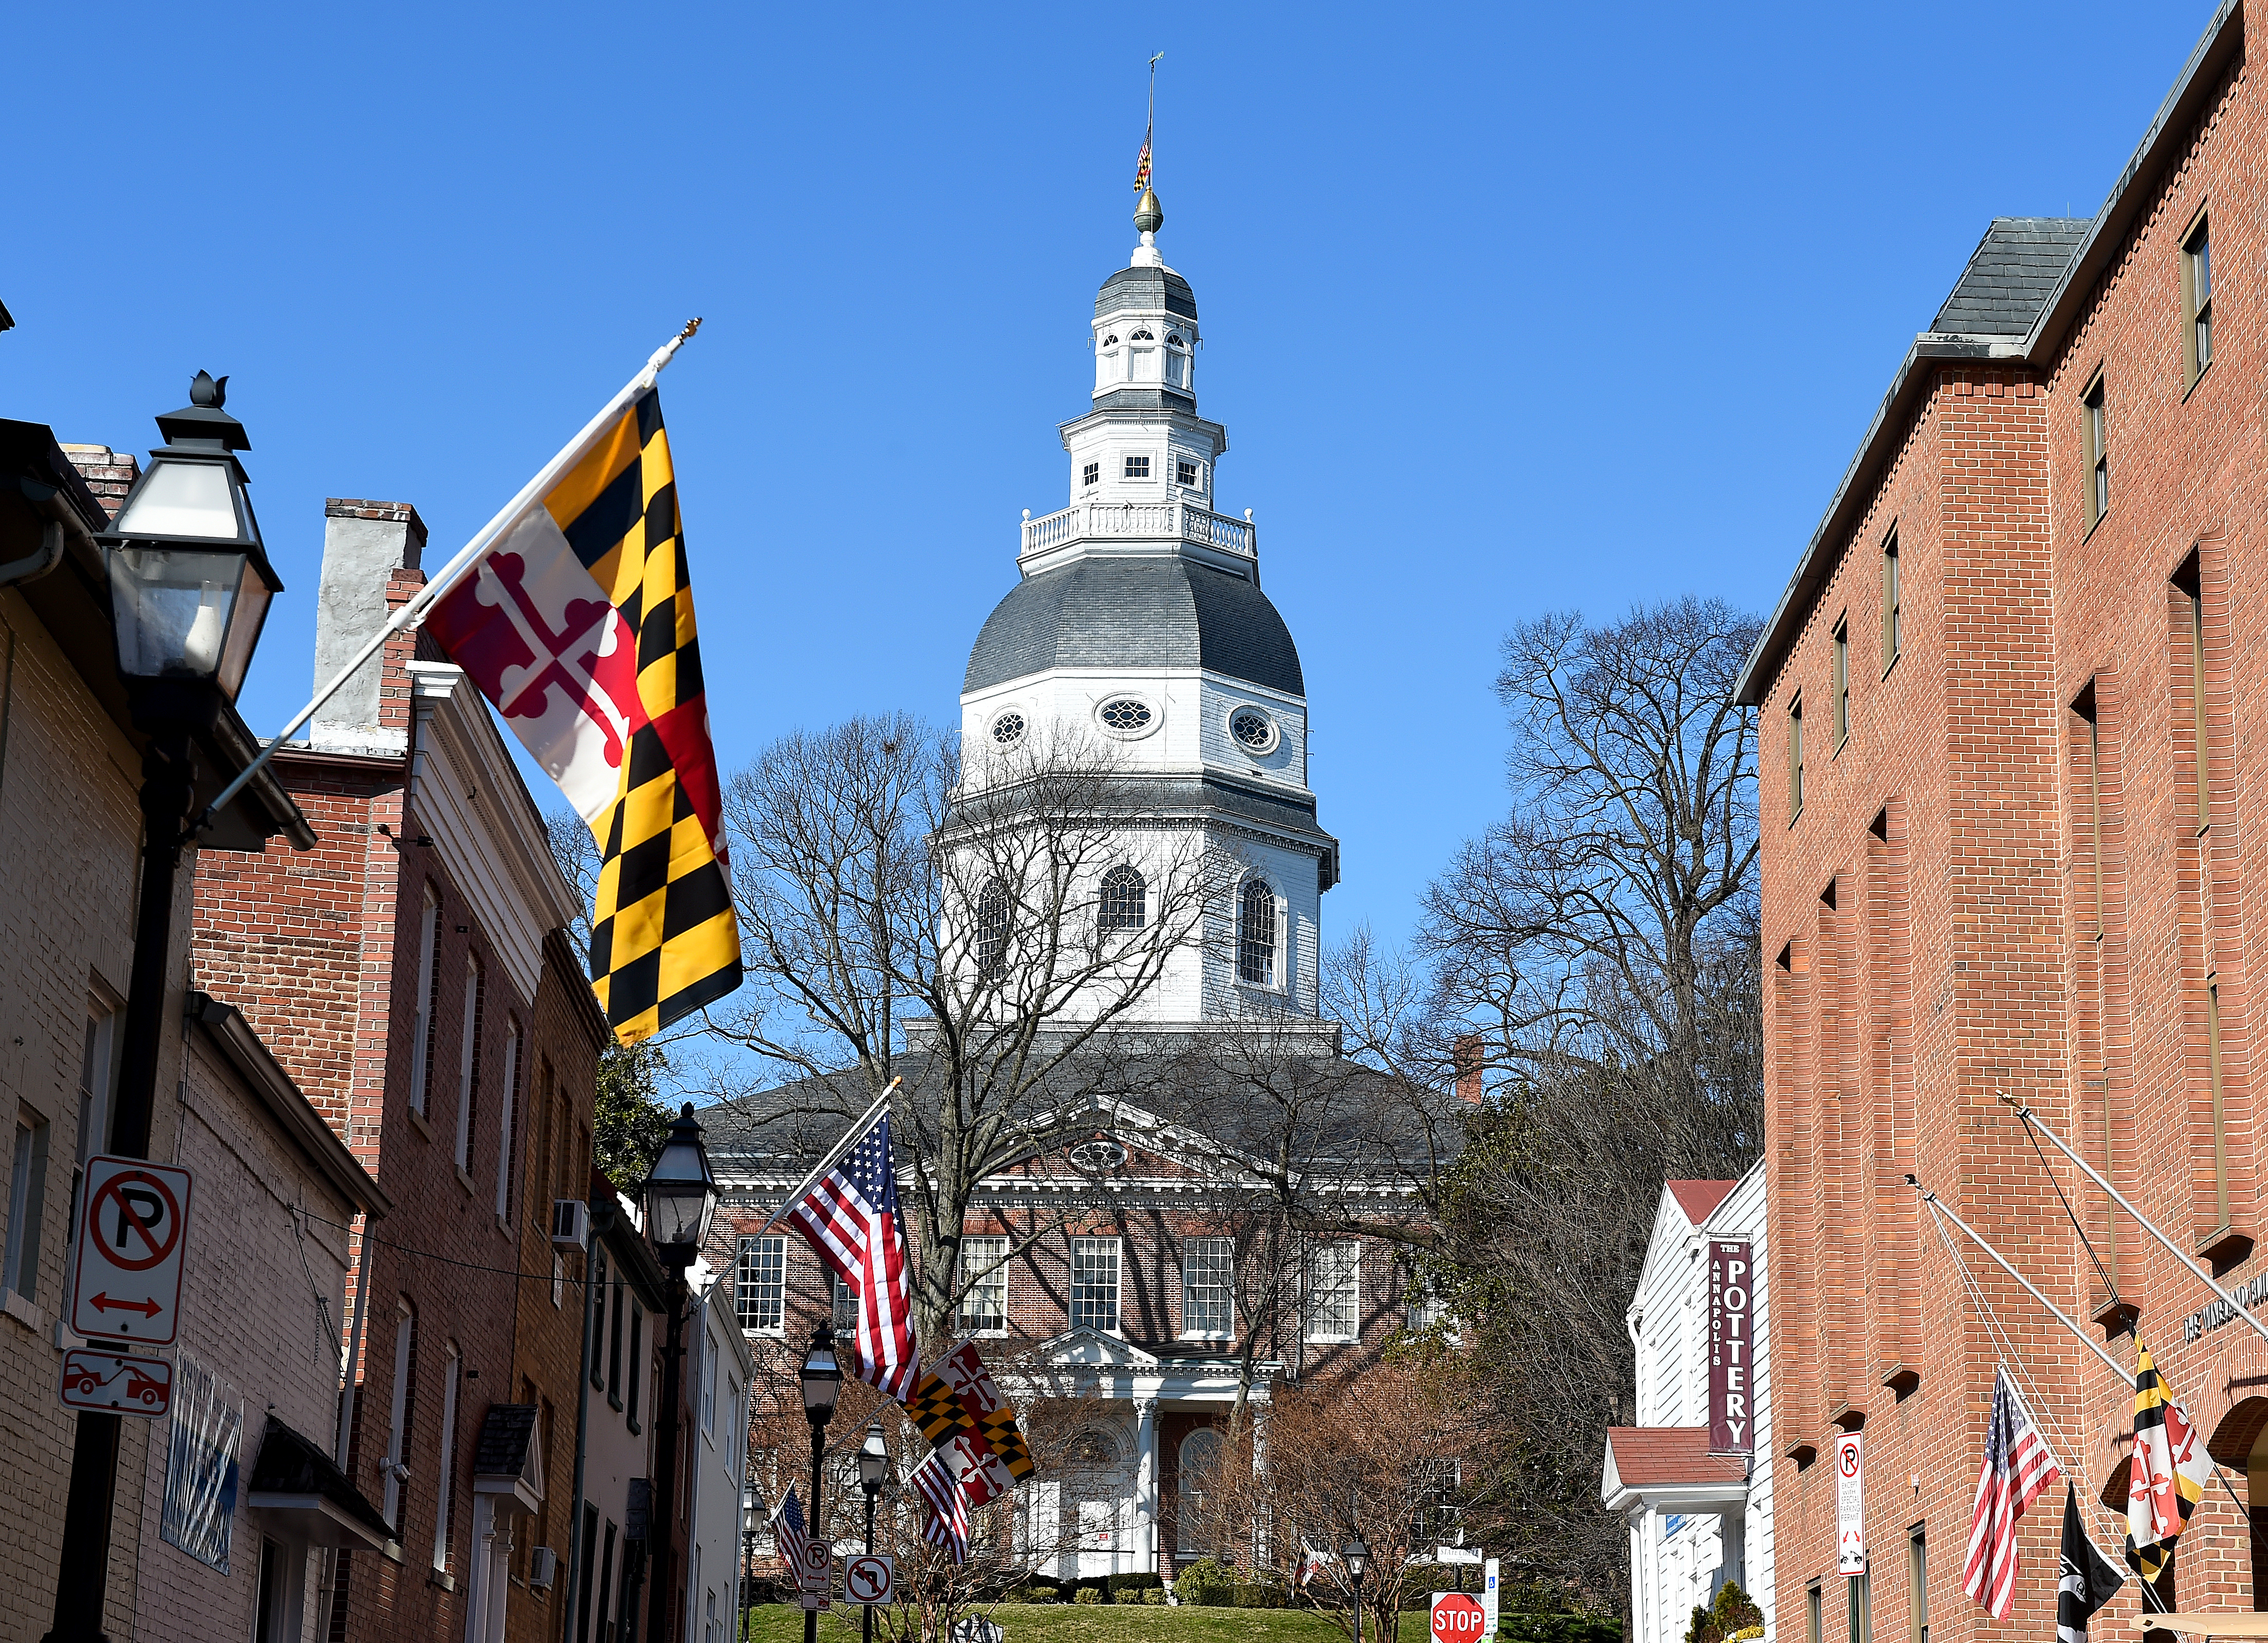 The Maryland State House building is pictured. In the foreground is a Maryland state flag.